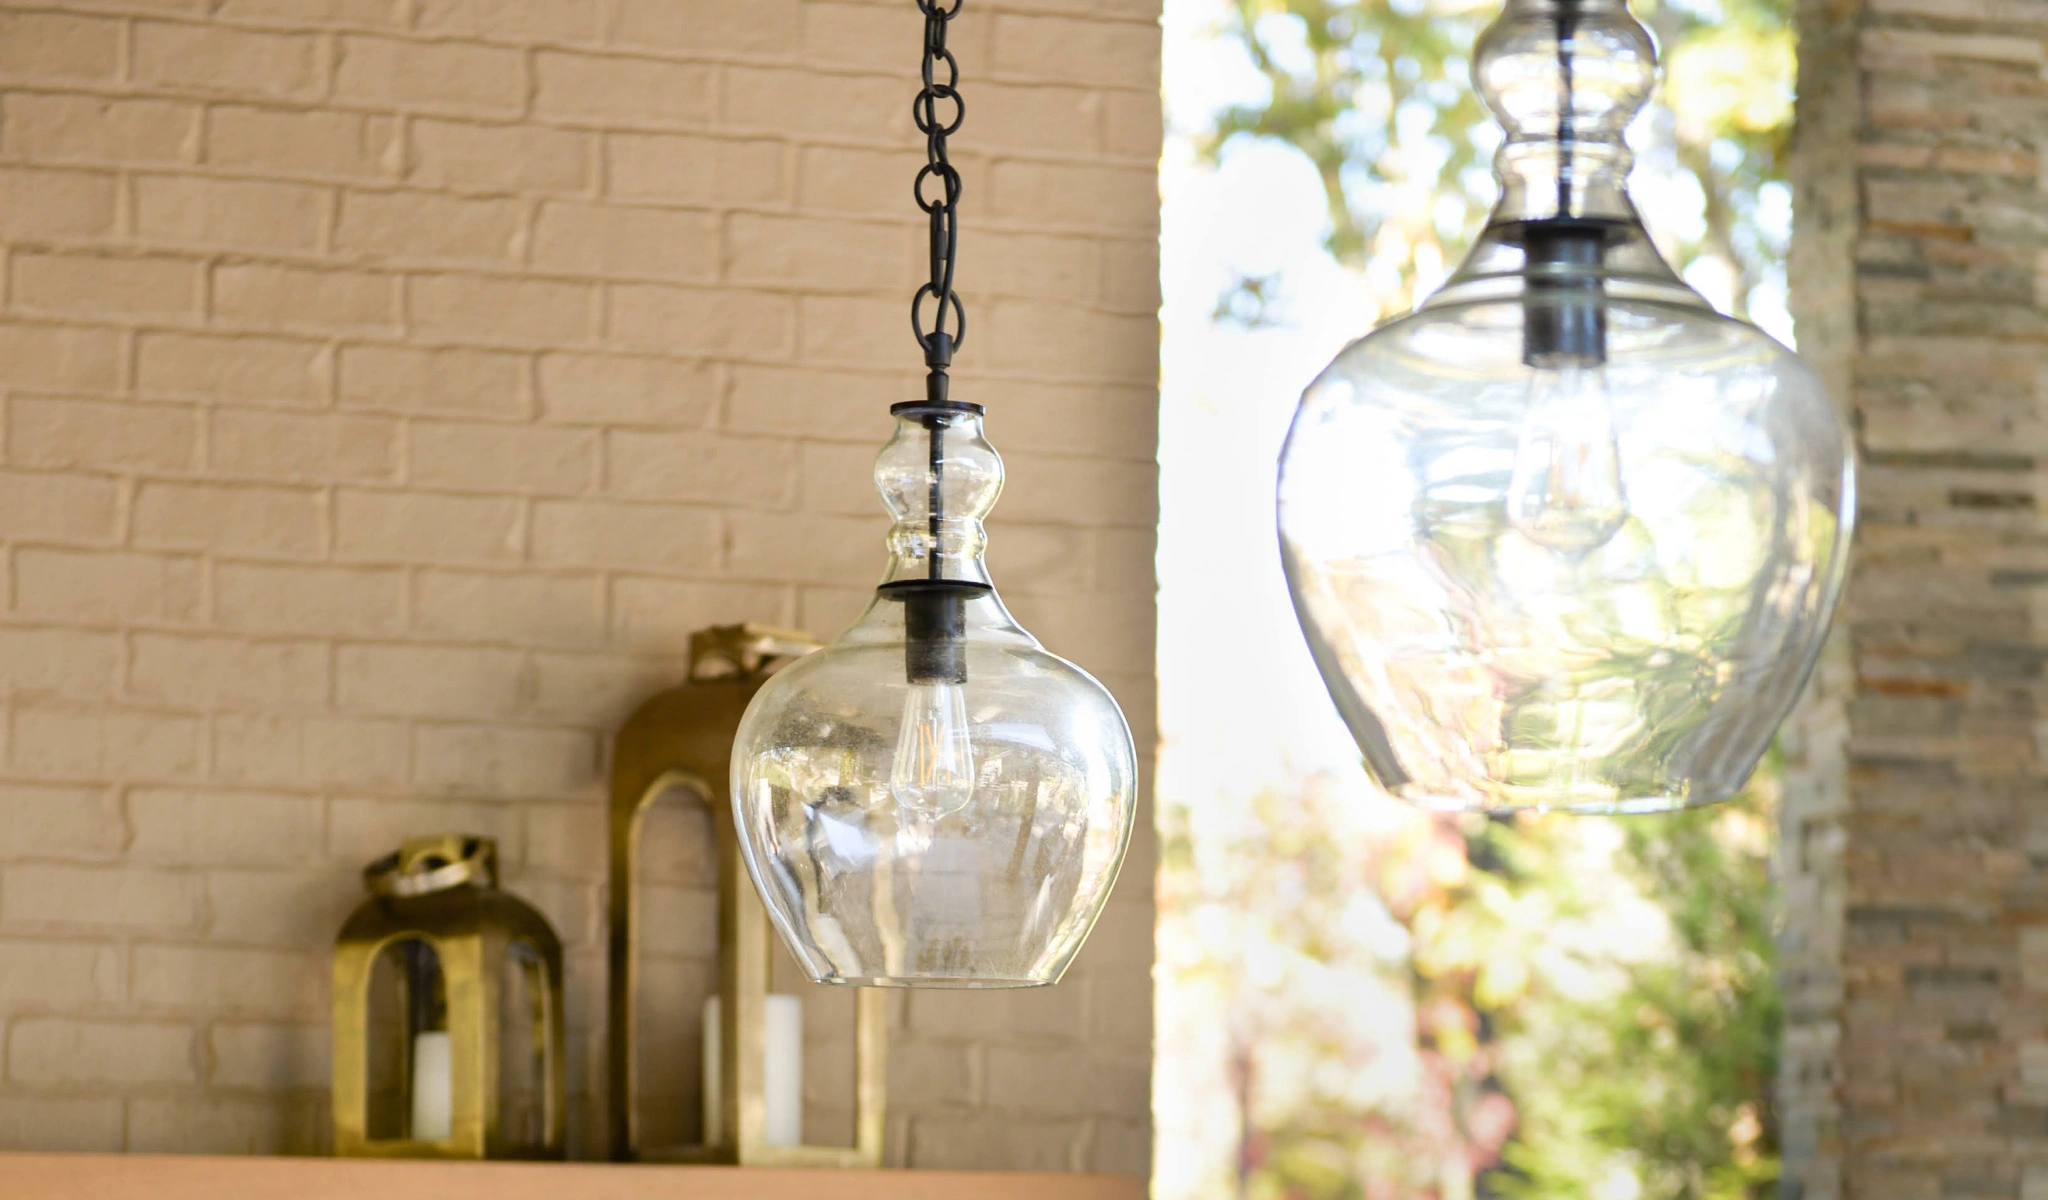 Two glass pendant lights in front of a brick wall.